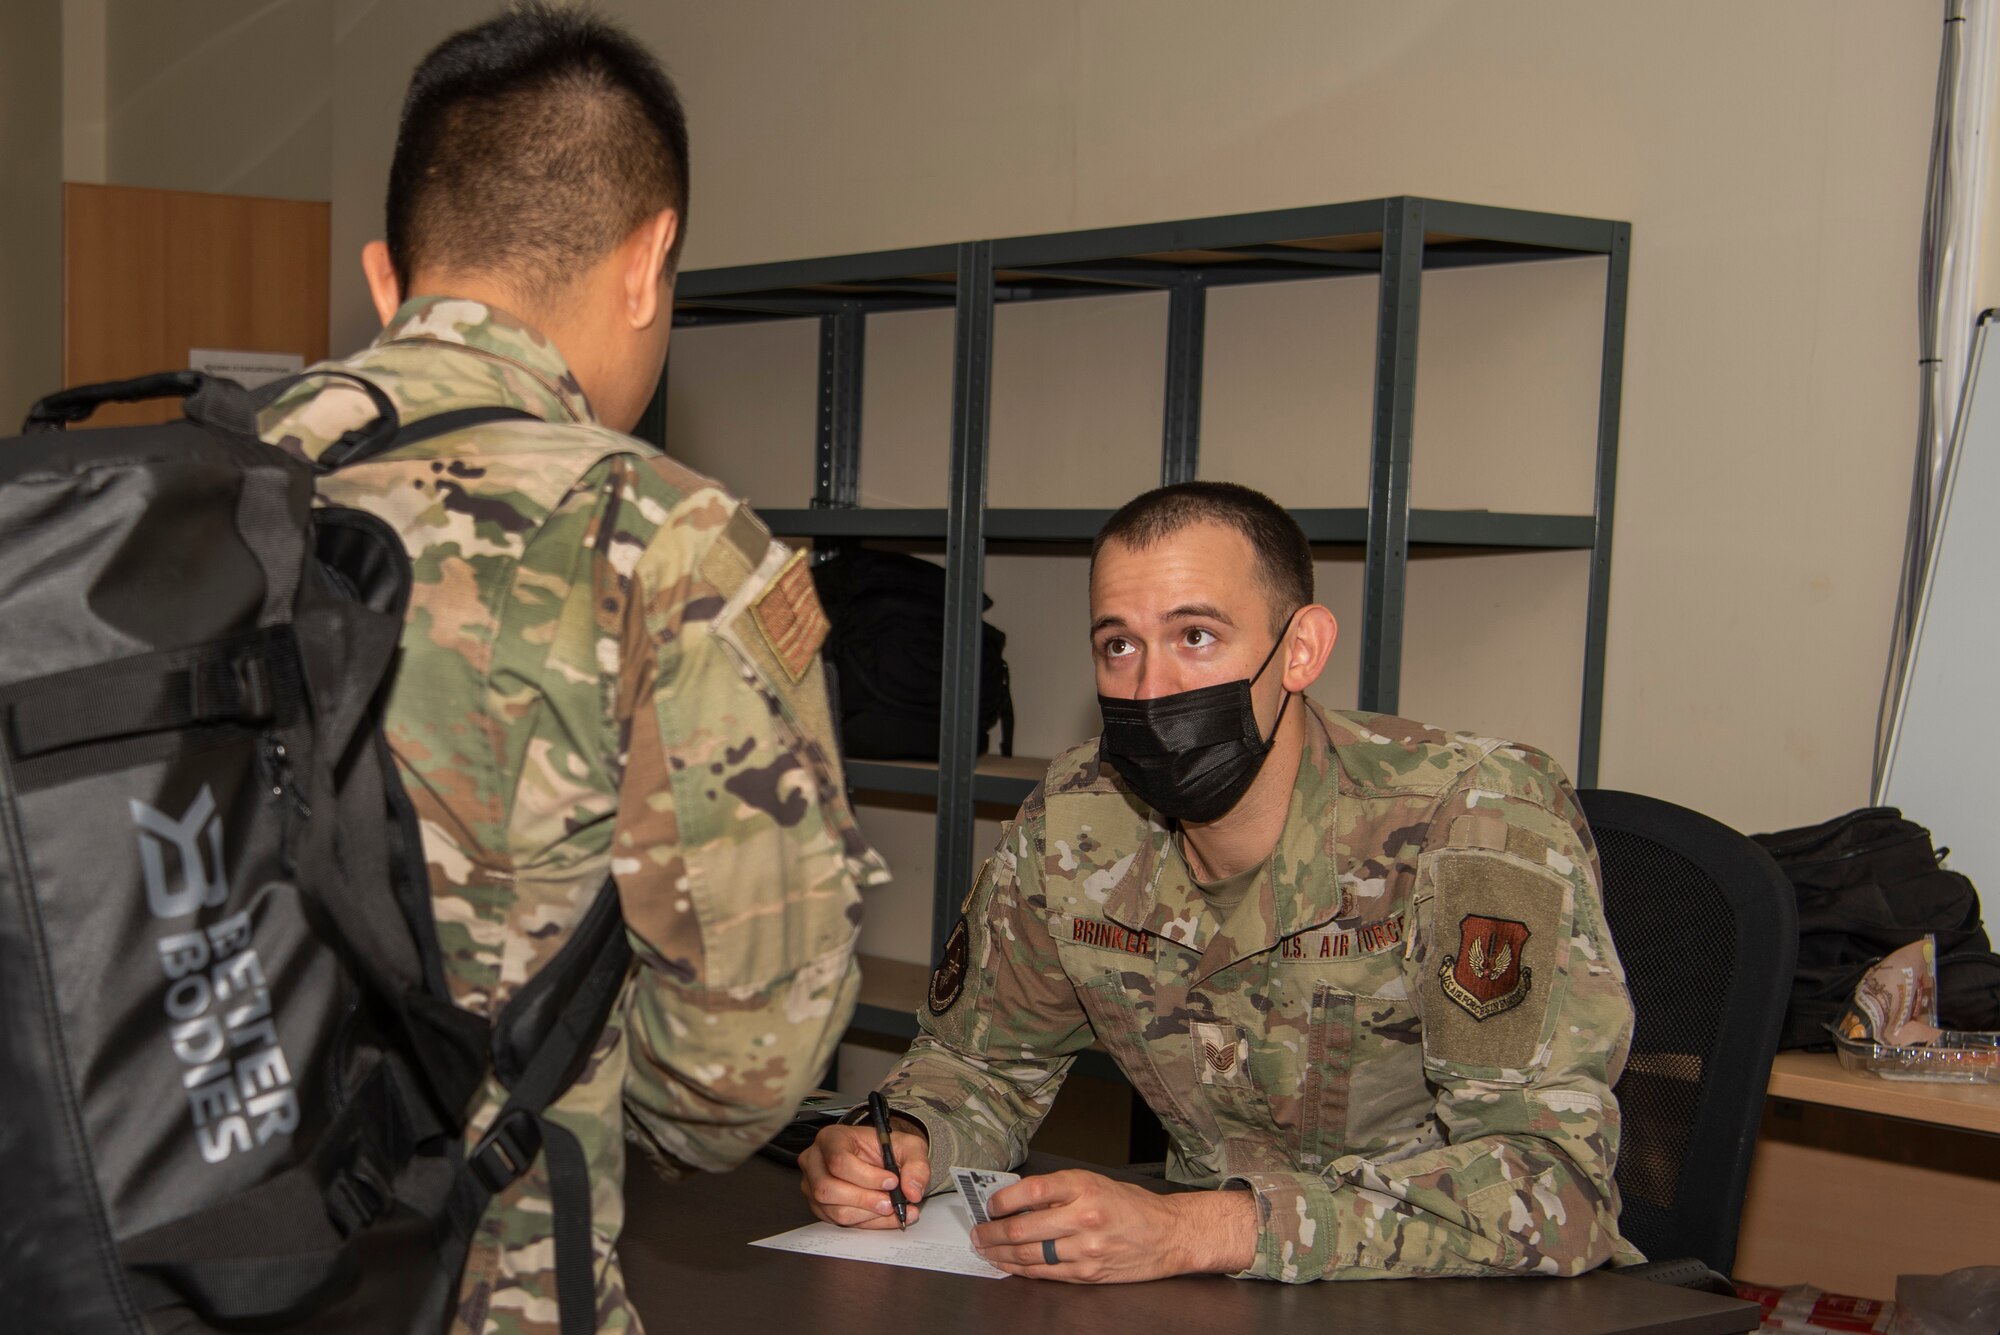 U.S. Air Force Tech. Sgt. Austin Brinker, 480th Expeditionary Fighter Squadron Public Health non-commissioned officer in charge, helps to inprocess U.S. service members arriving at  Łask Air Base, Poland, July 27, 2021. Airmen assigned to the 52nd Fighter Wing, Spangdahlem Air Base, Germany are in Poland to participate in Aviation Detachment Rotation 21.3 to increase interoperability with allied partners. (U.S. Air Force photo by Tech. Sgt. Anthony Plyler)